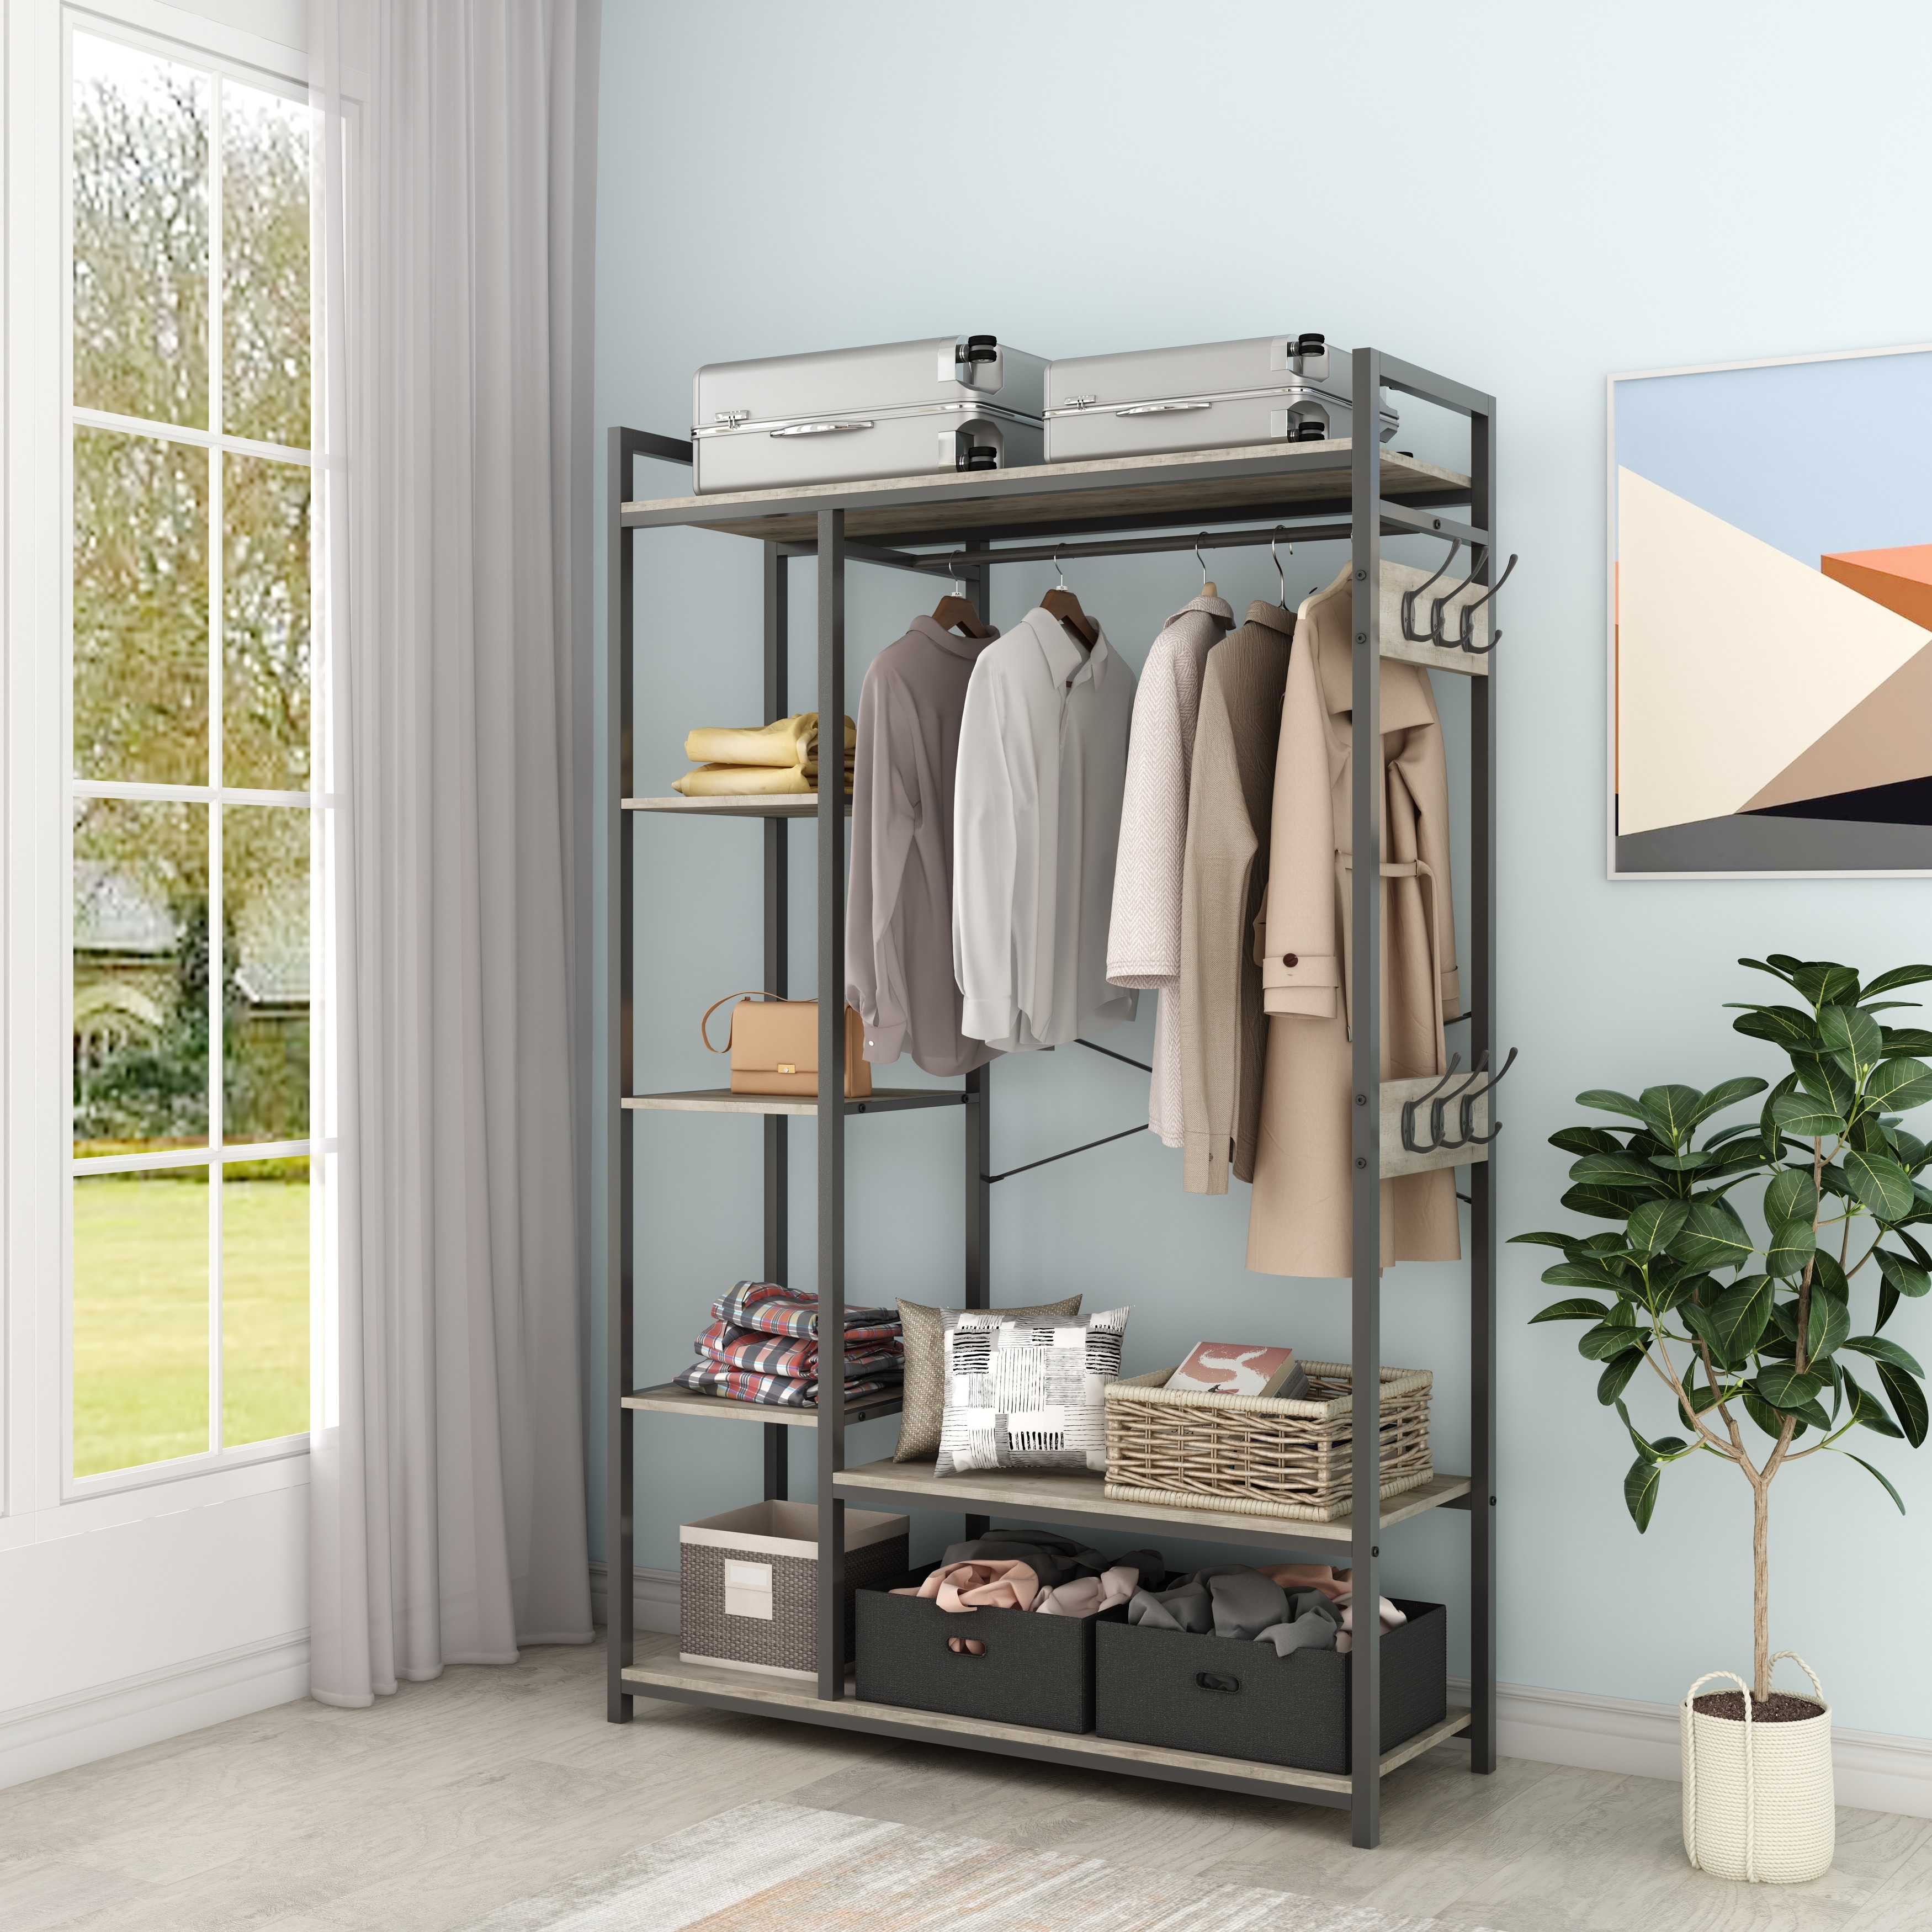 https://ak1.ostkcdn.com/images/products/is/images/direct/de27d465678a56e5125a7e94a052c7233d1f16a1/Free-Standing-Closet-Organizer-with-Storage-Box-%26-Side-Hook-Portable-Garment-Rack-with-6-Shelves-and-Hanging-Rod.jpg